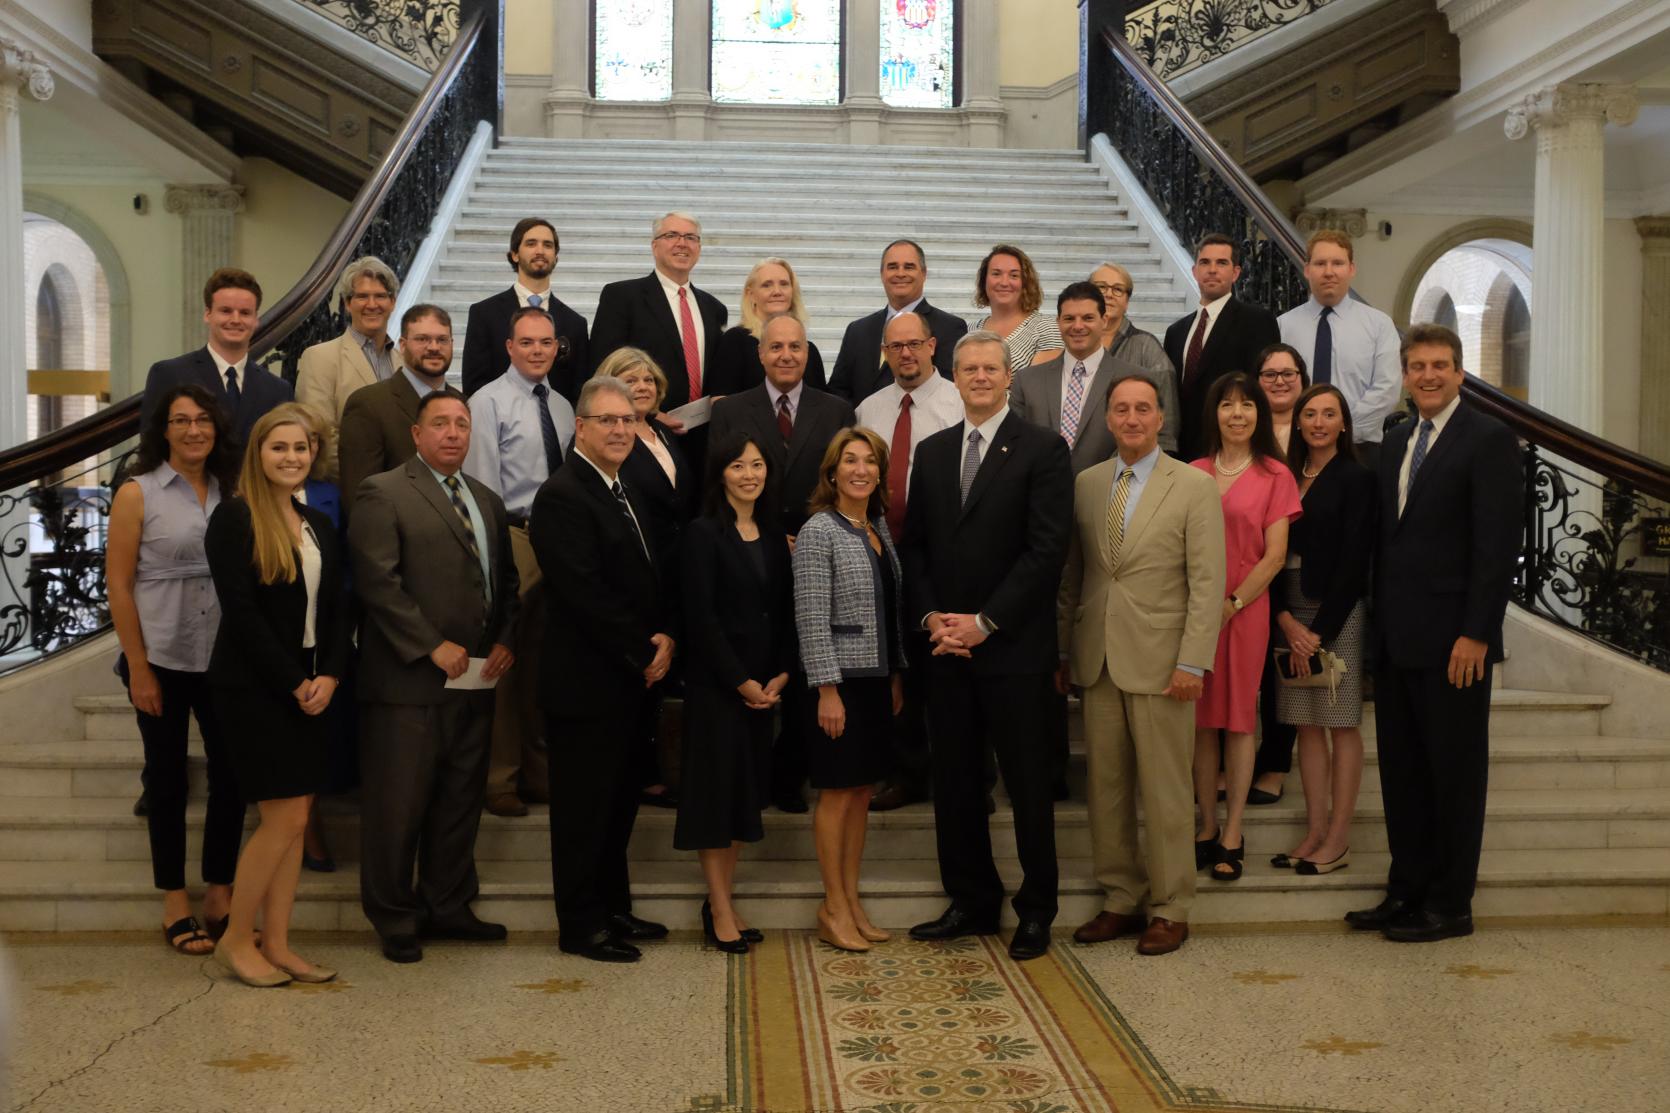 Governor Charlie Baker and Lt. Governor Karyn Polito, center, and EOHED Secretary Jay Ash, right, are joined by officials from Massachusetts cities and towns during the 2018 Community Development Block Grant announcement at the State House.